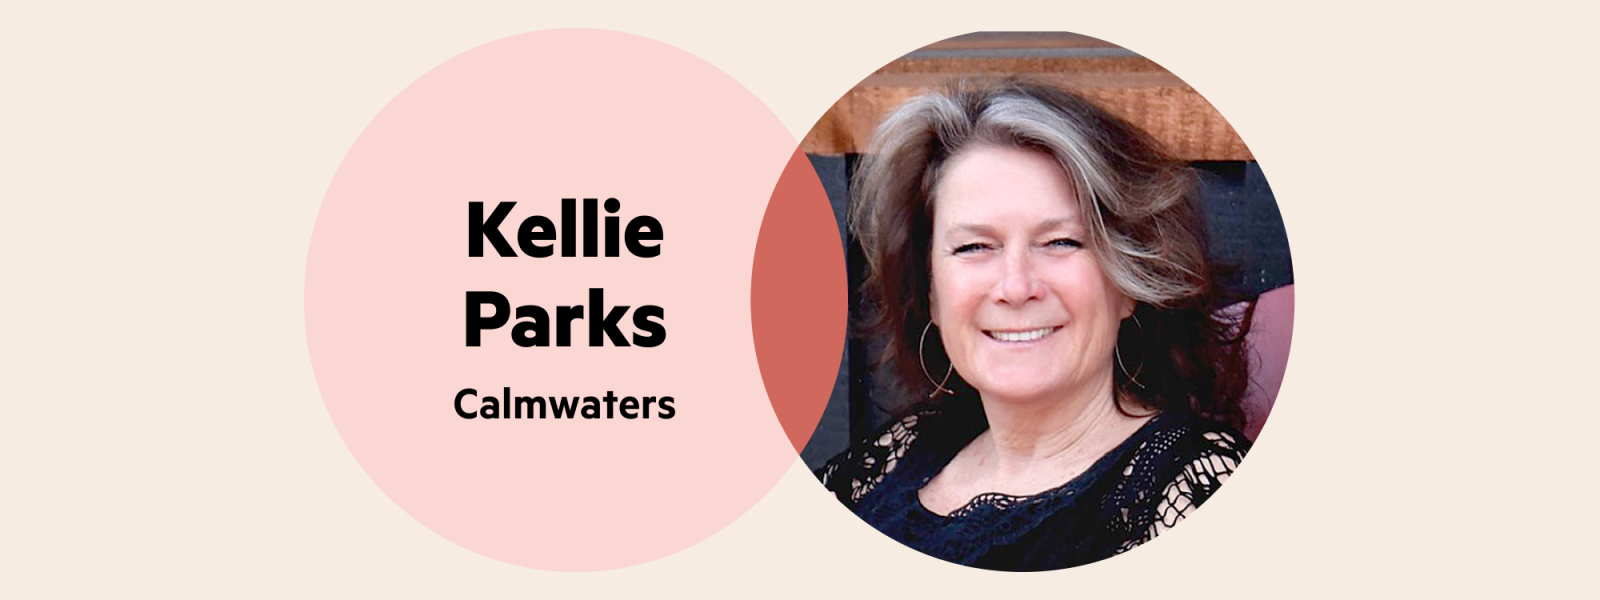 A Venn diagram—in the left circle are the words 'Kellie Parks Calmwaters' and in the right circle is Kellie's headshot.